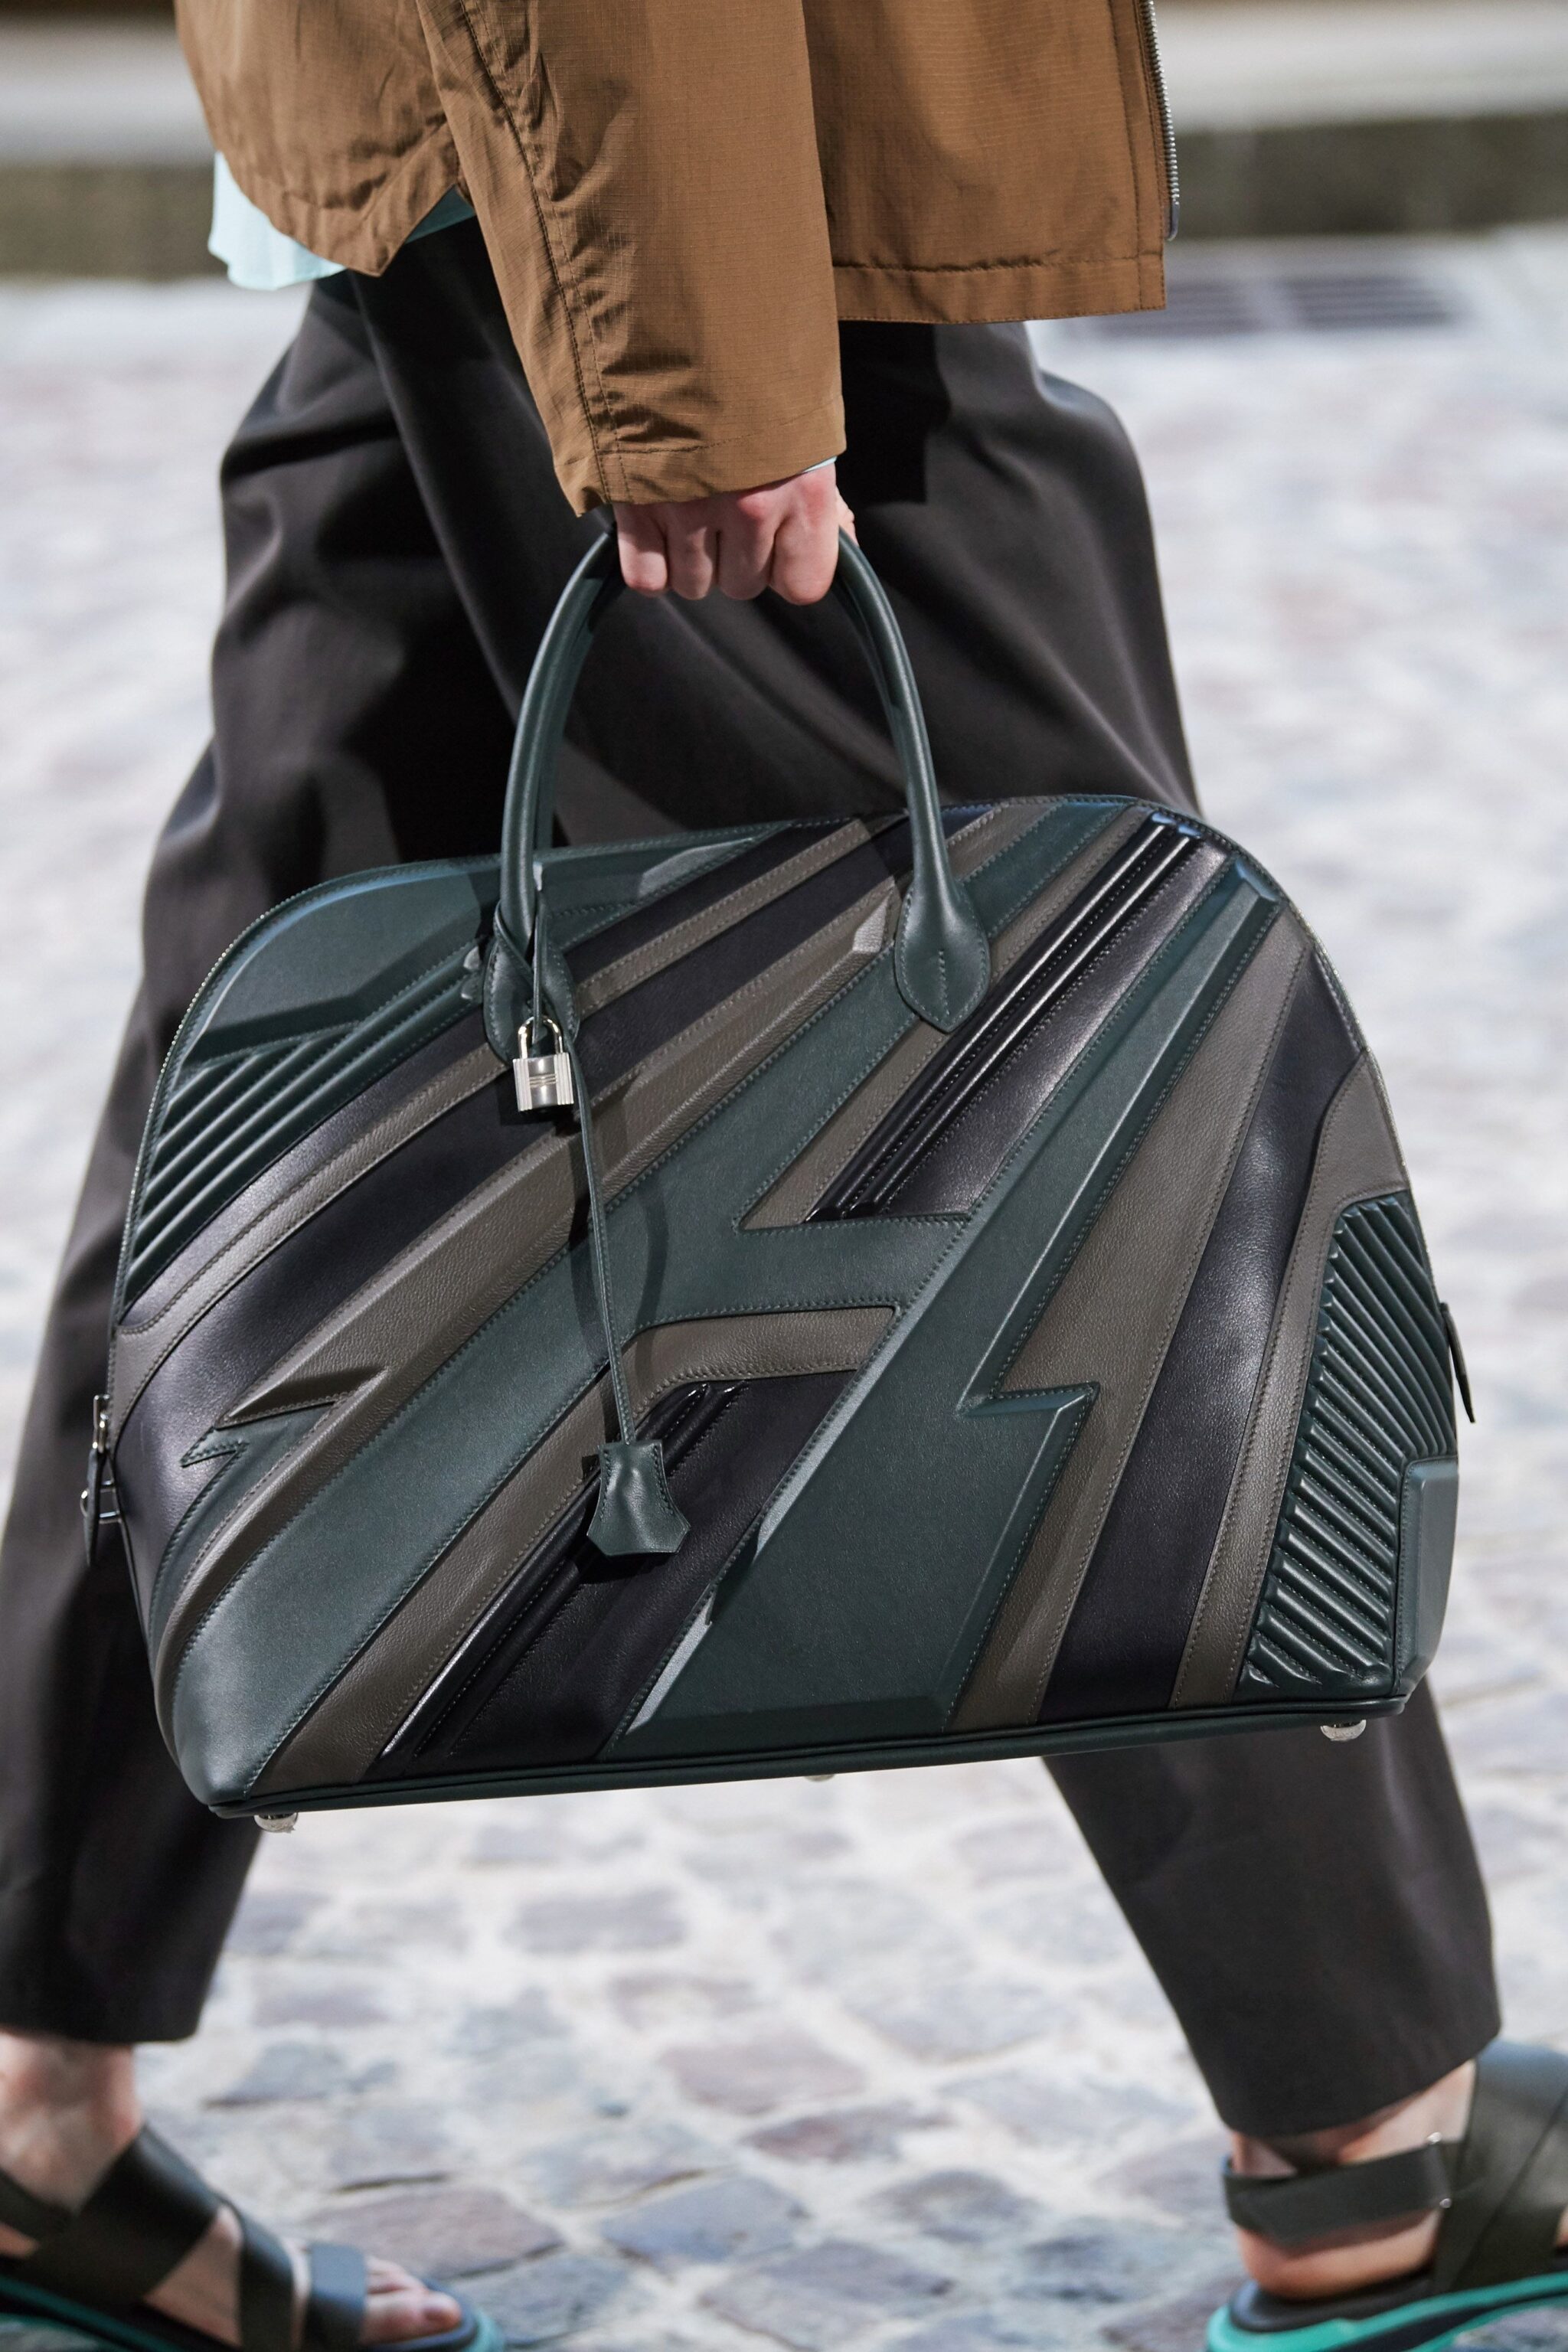 Hermès Spring/Summer 2020 Menswear Collection | Spotted Fashion